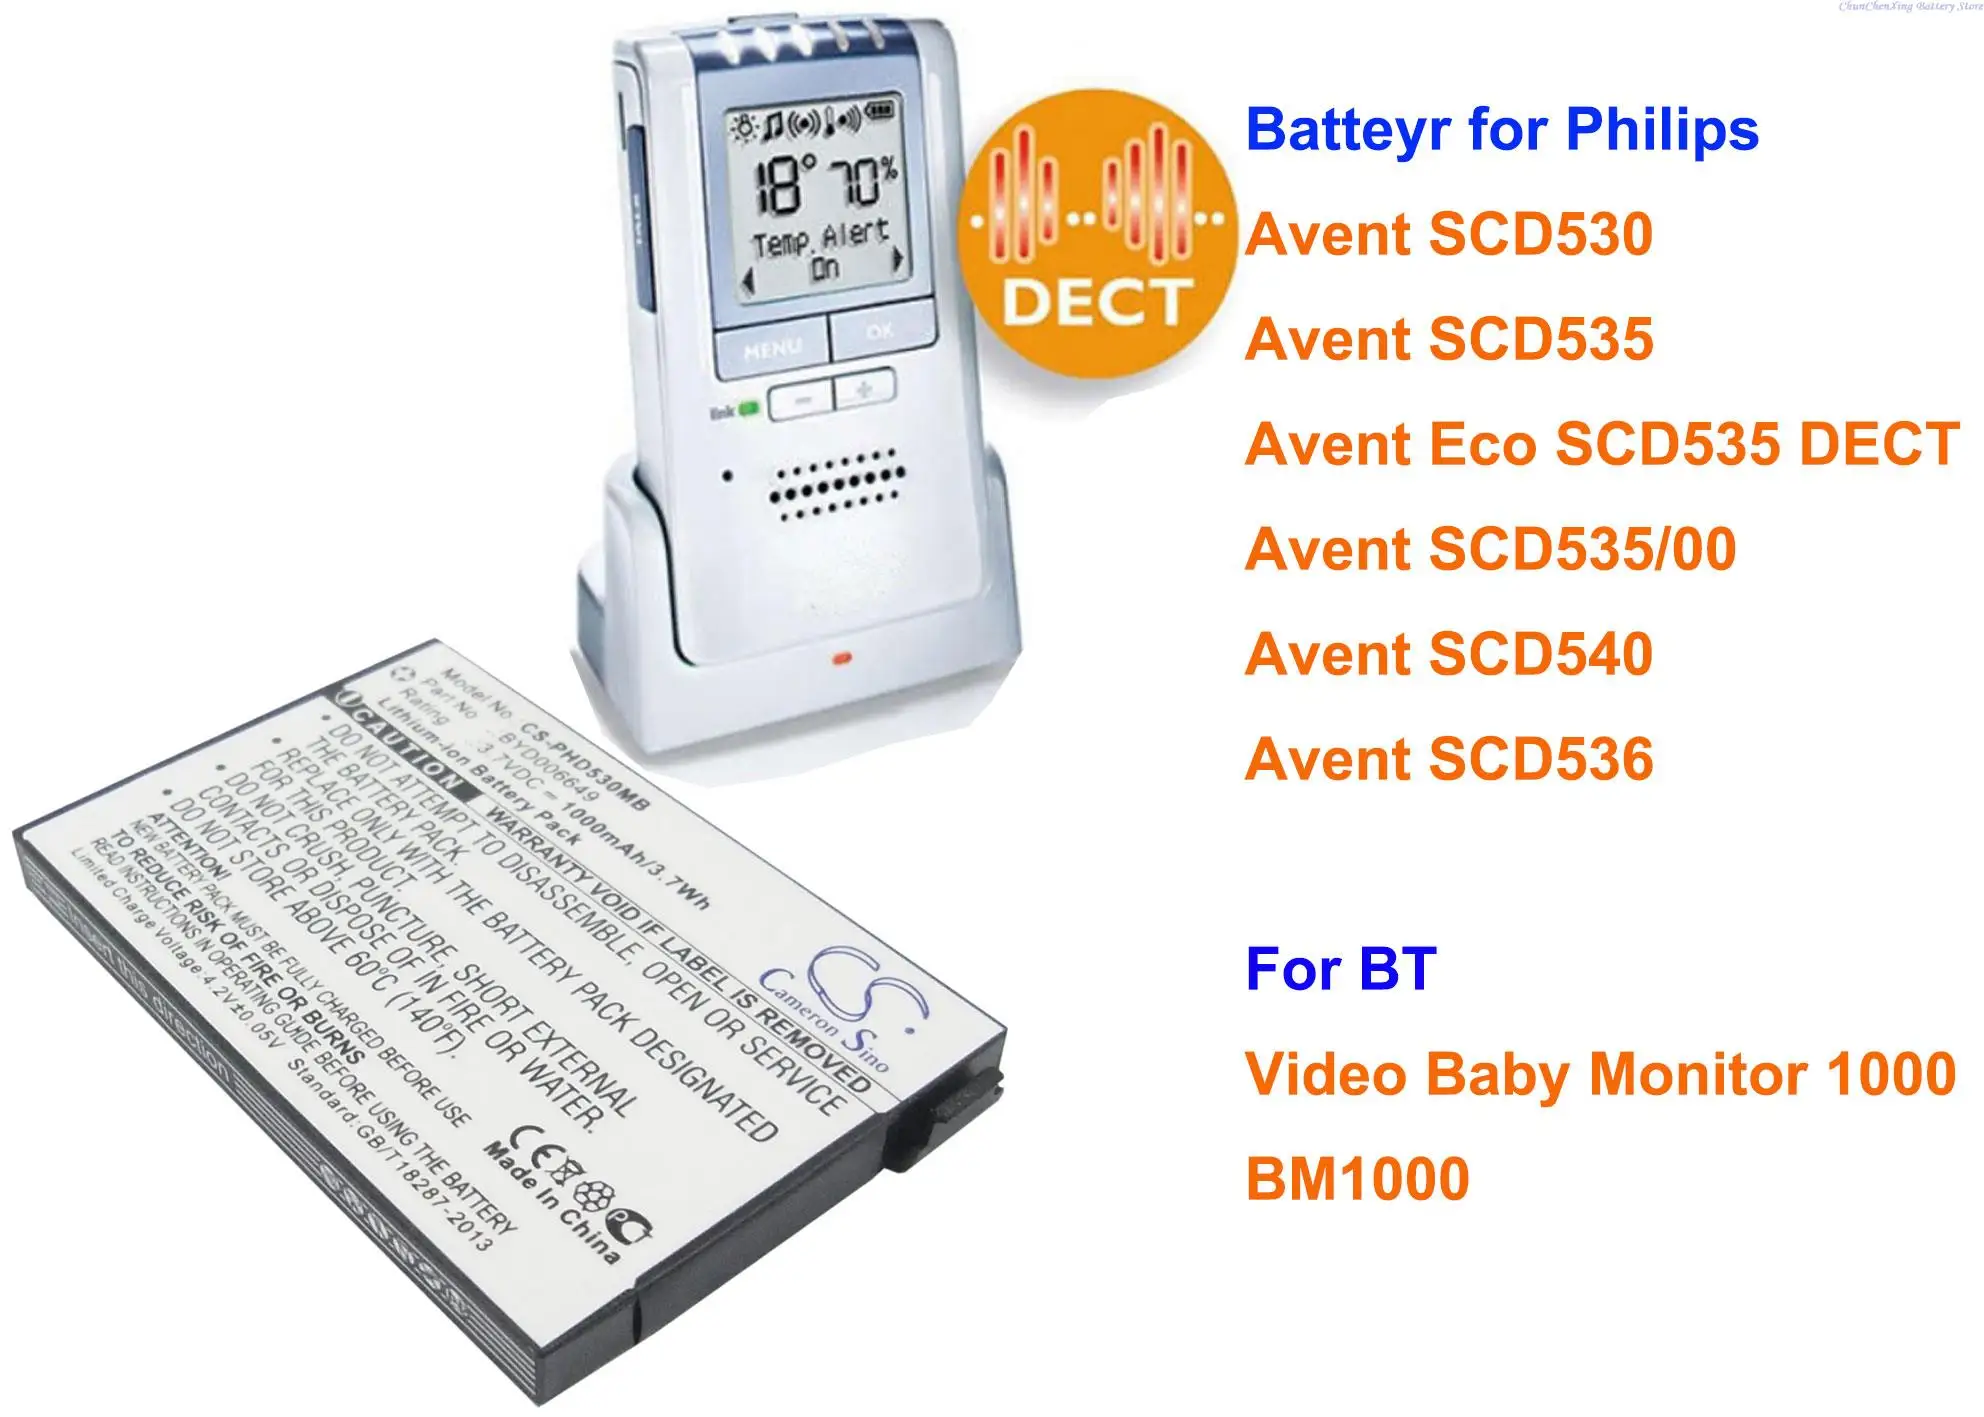 

OrangeYu 1000mAh Battery BYD006649 for BT BM1000, Video Baby Monitor 1000, For Philips Avent SCD530, SCD535, SCD536, SCD540